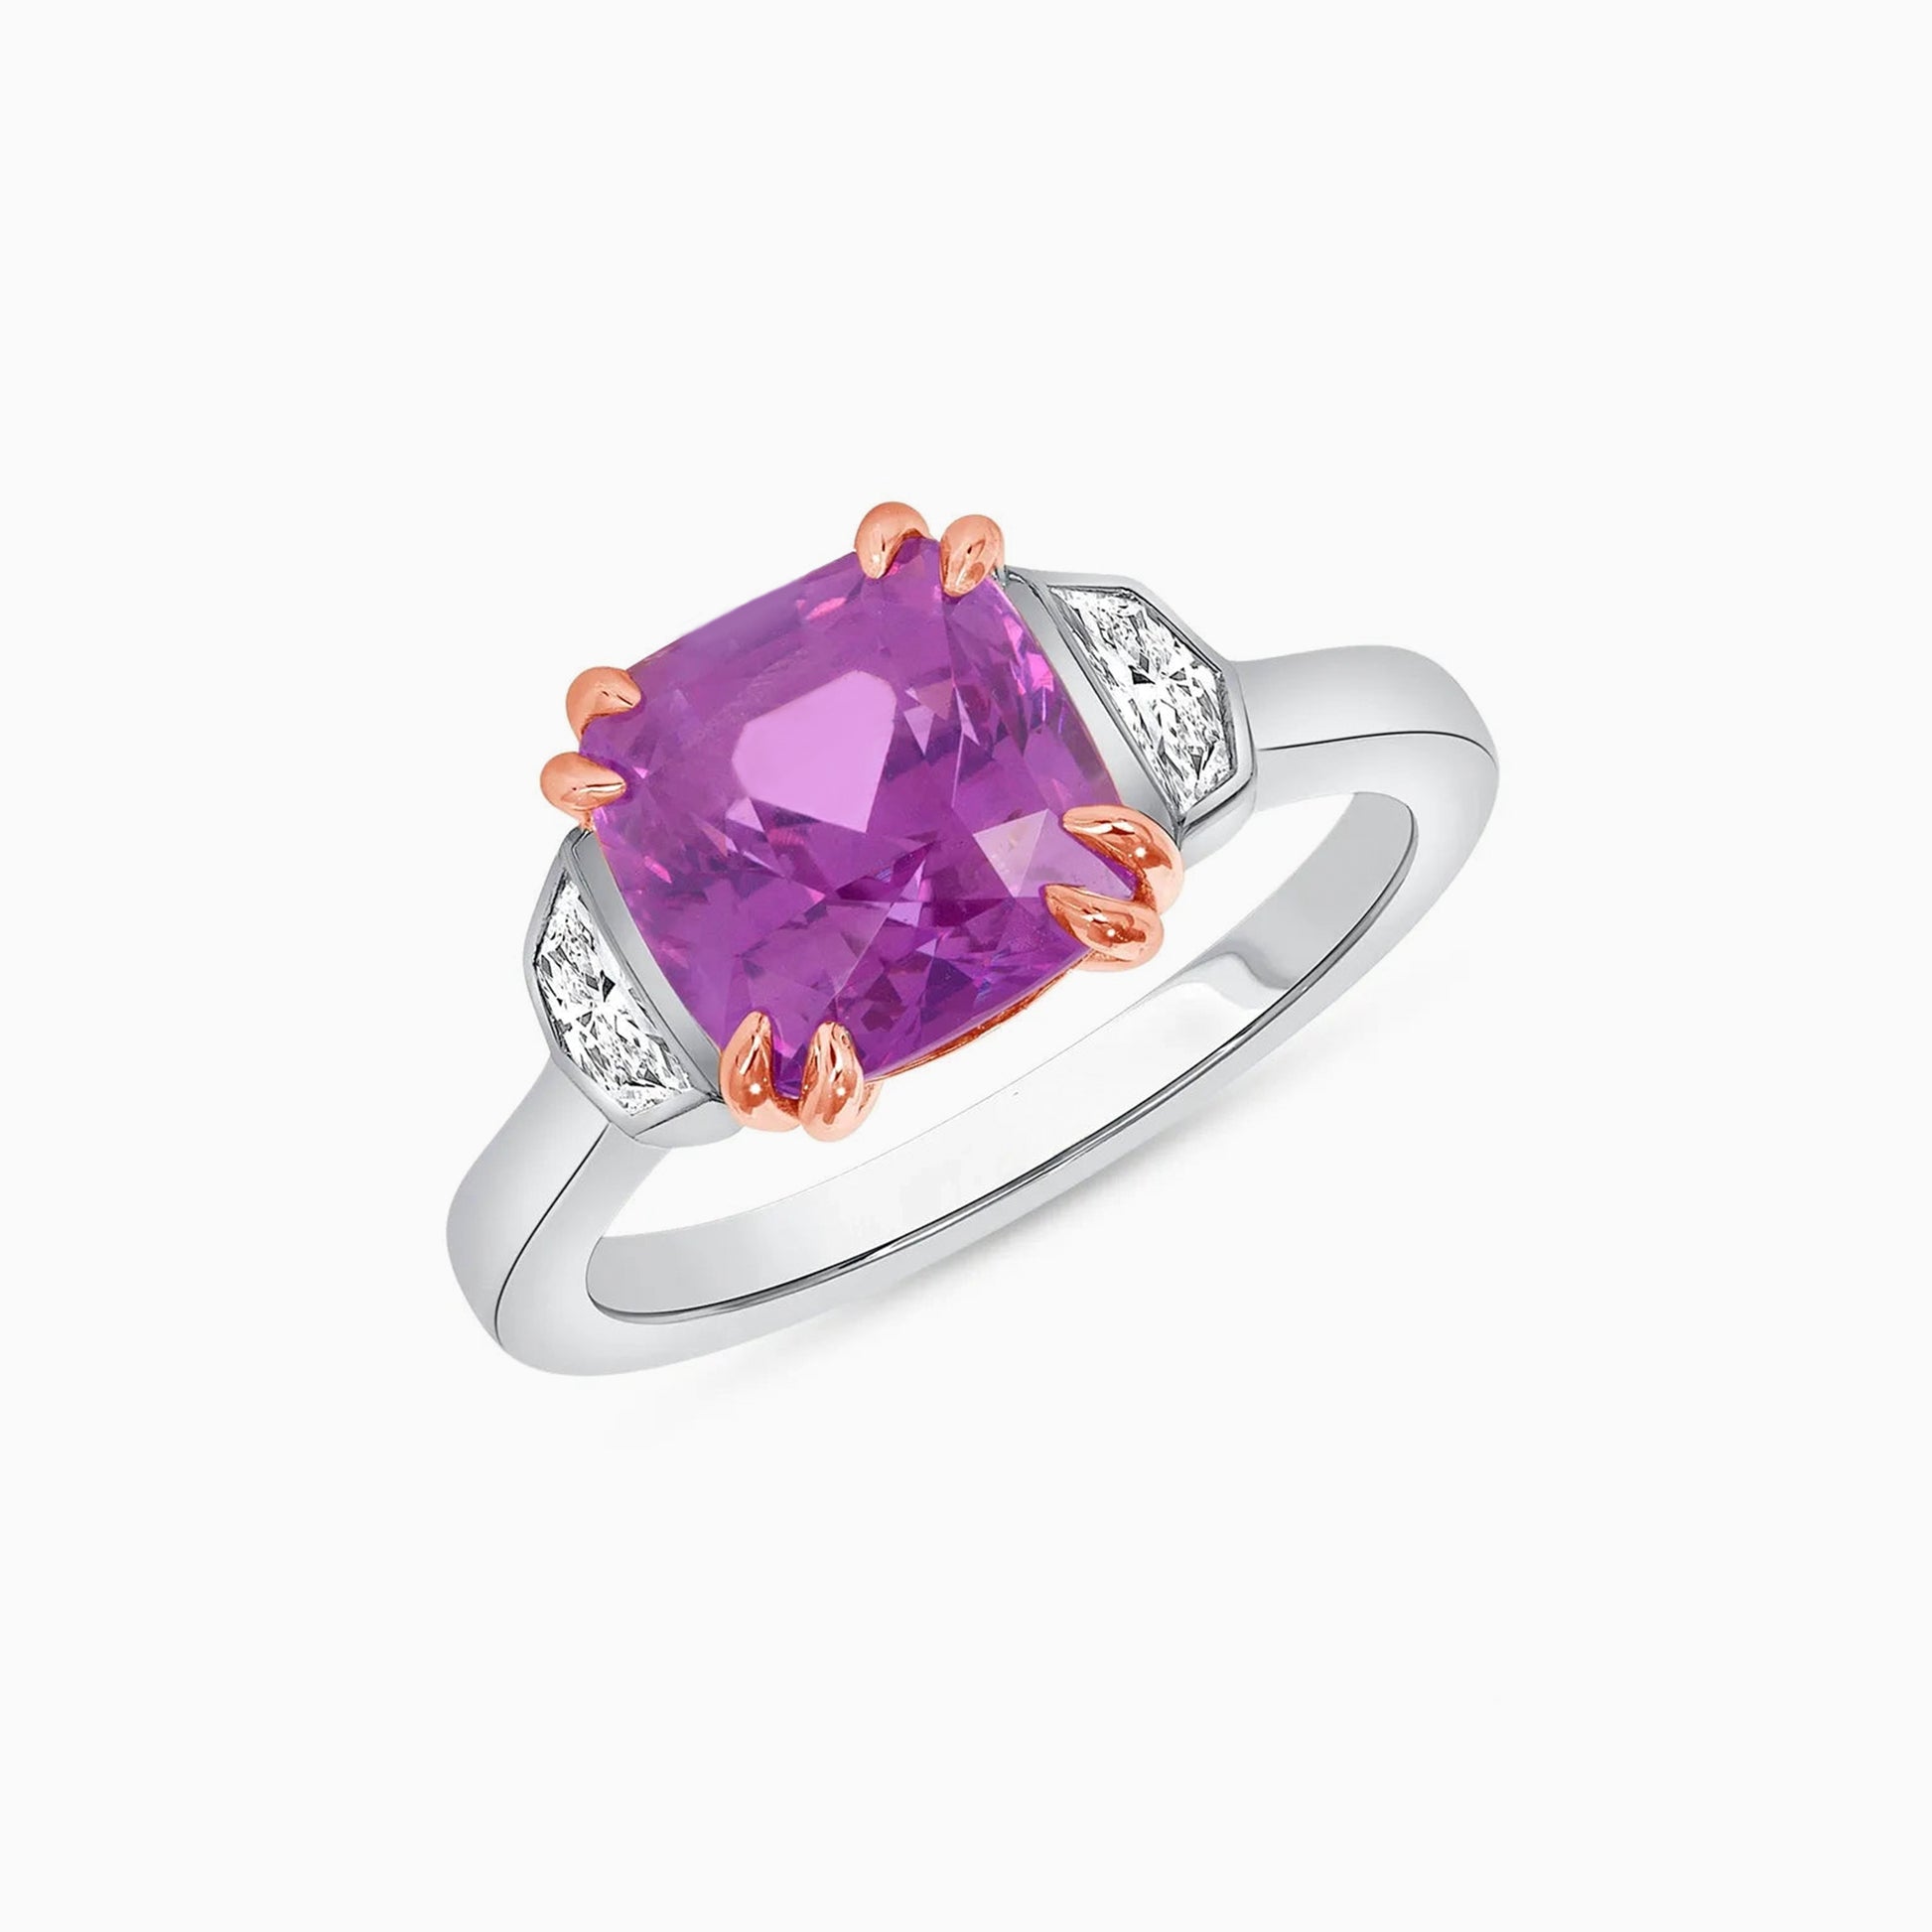 Unheated Pink Sapphire Ring on a white background